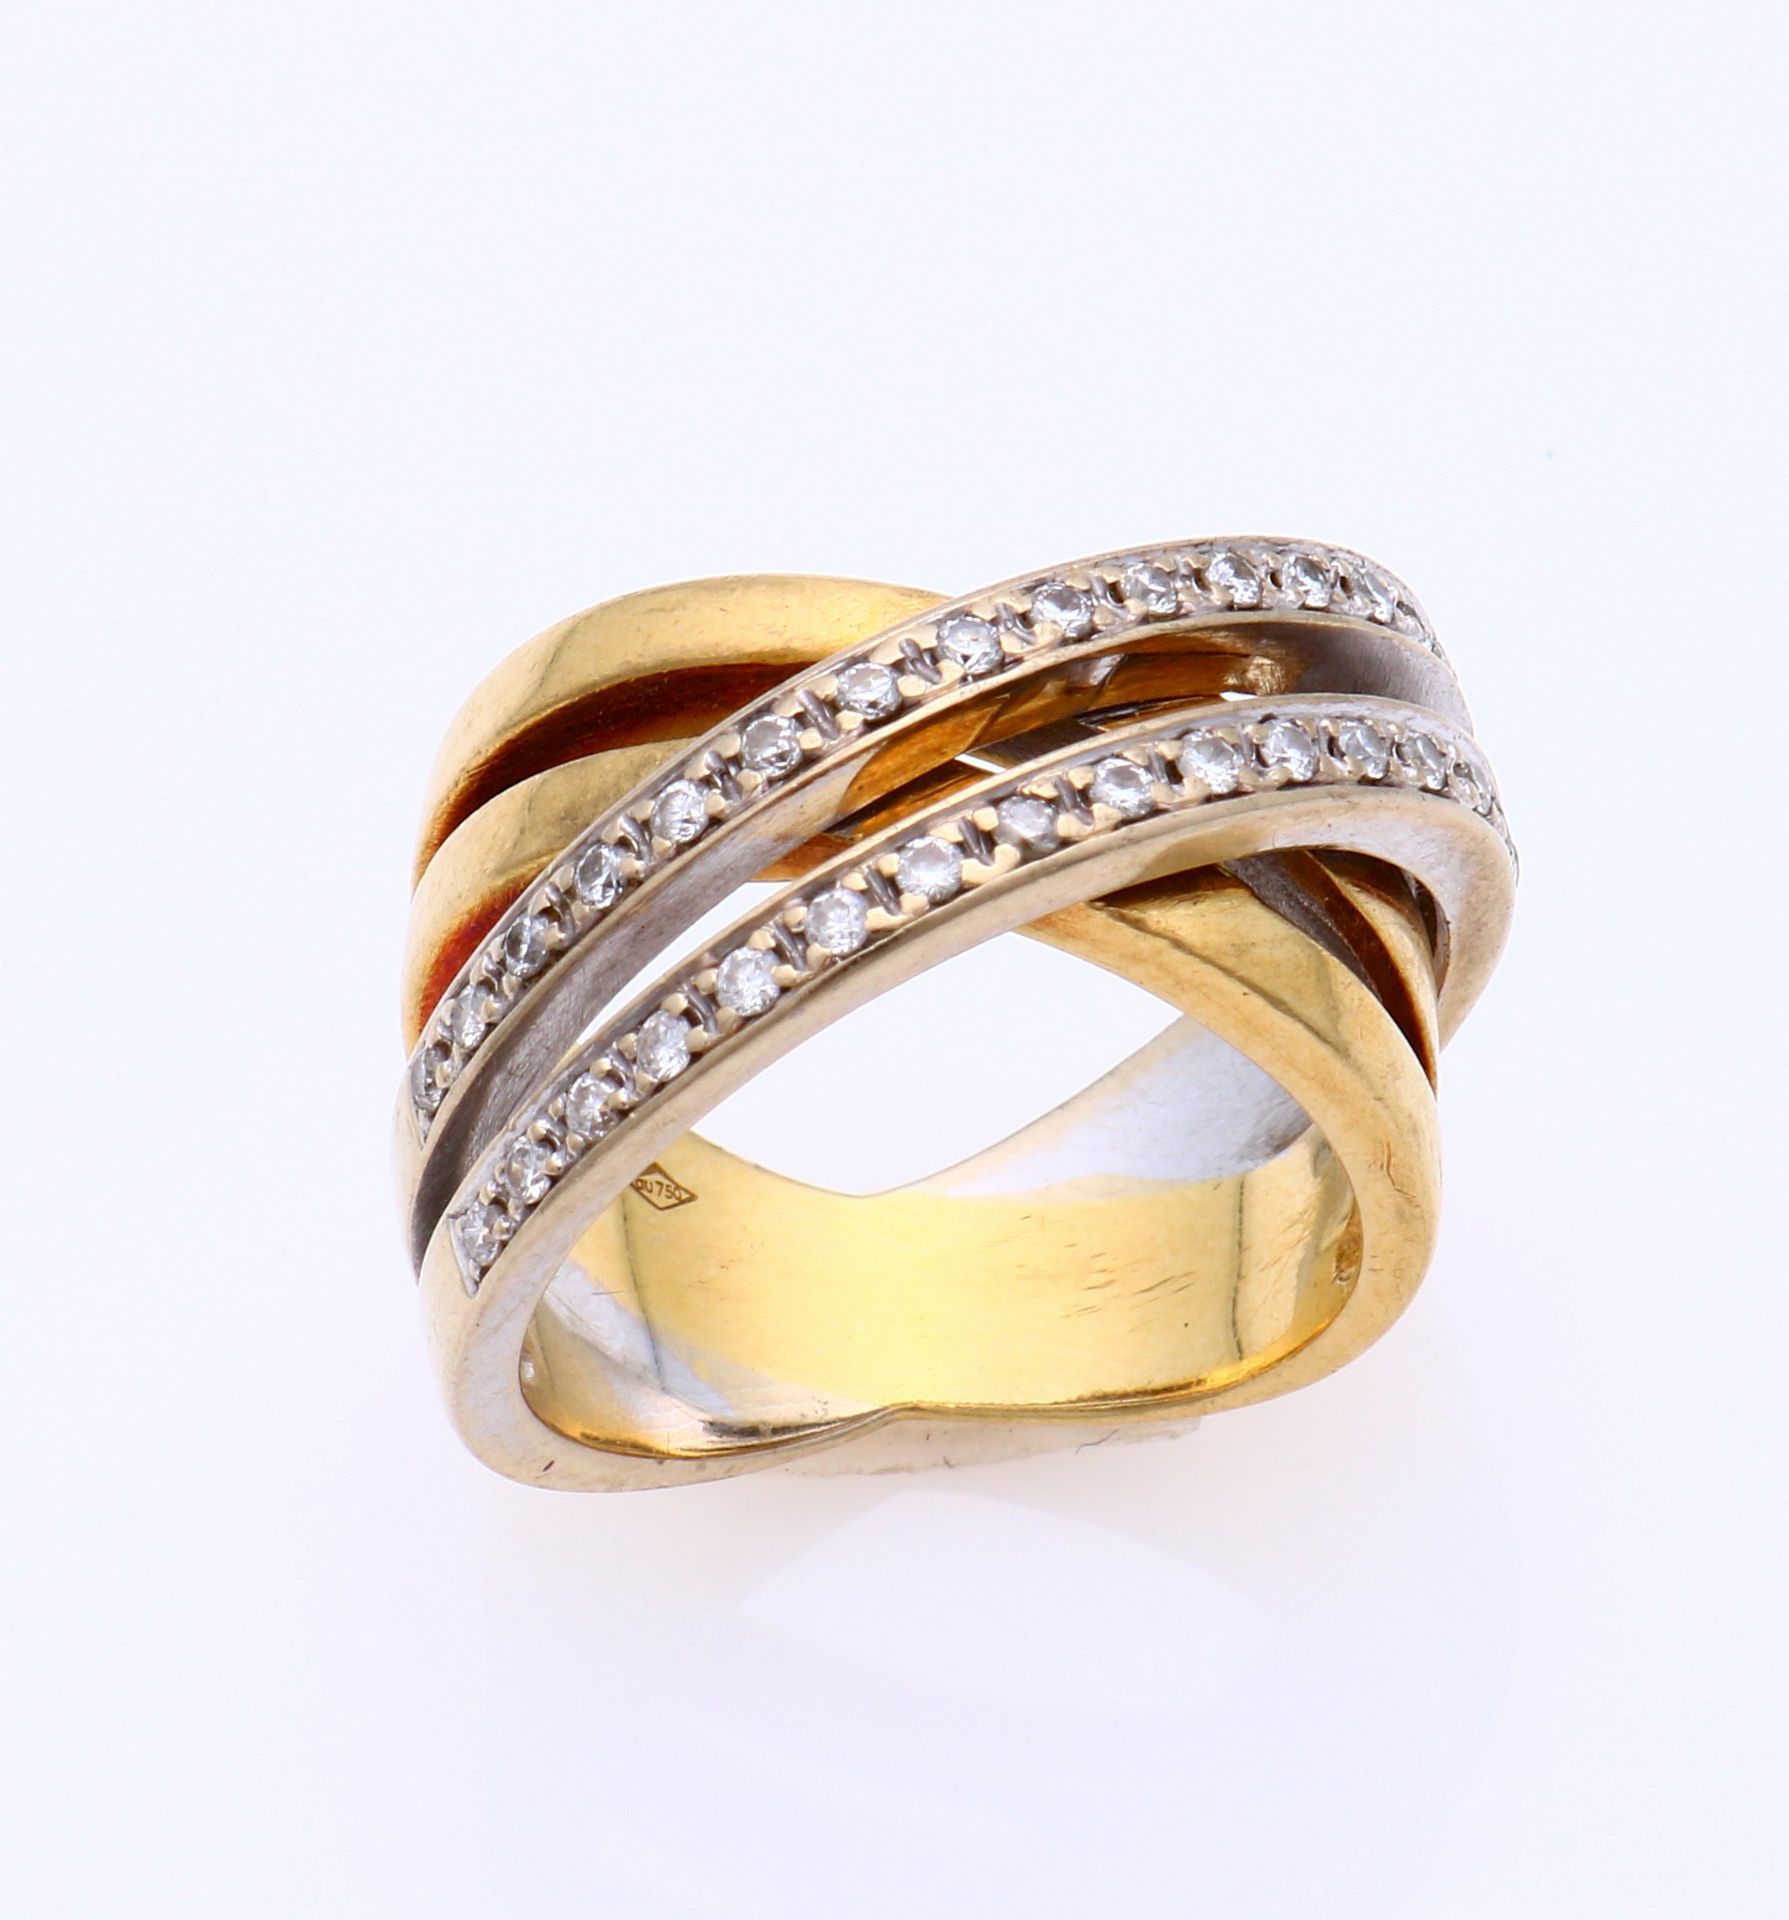 Gold ring with 2 lanes with diamond